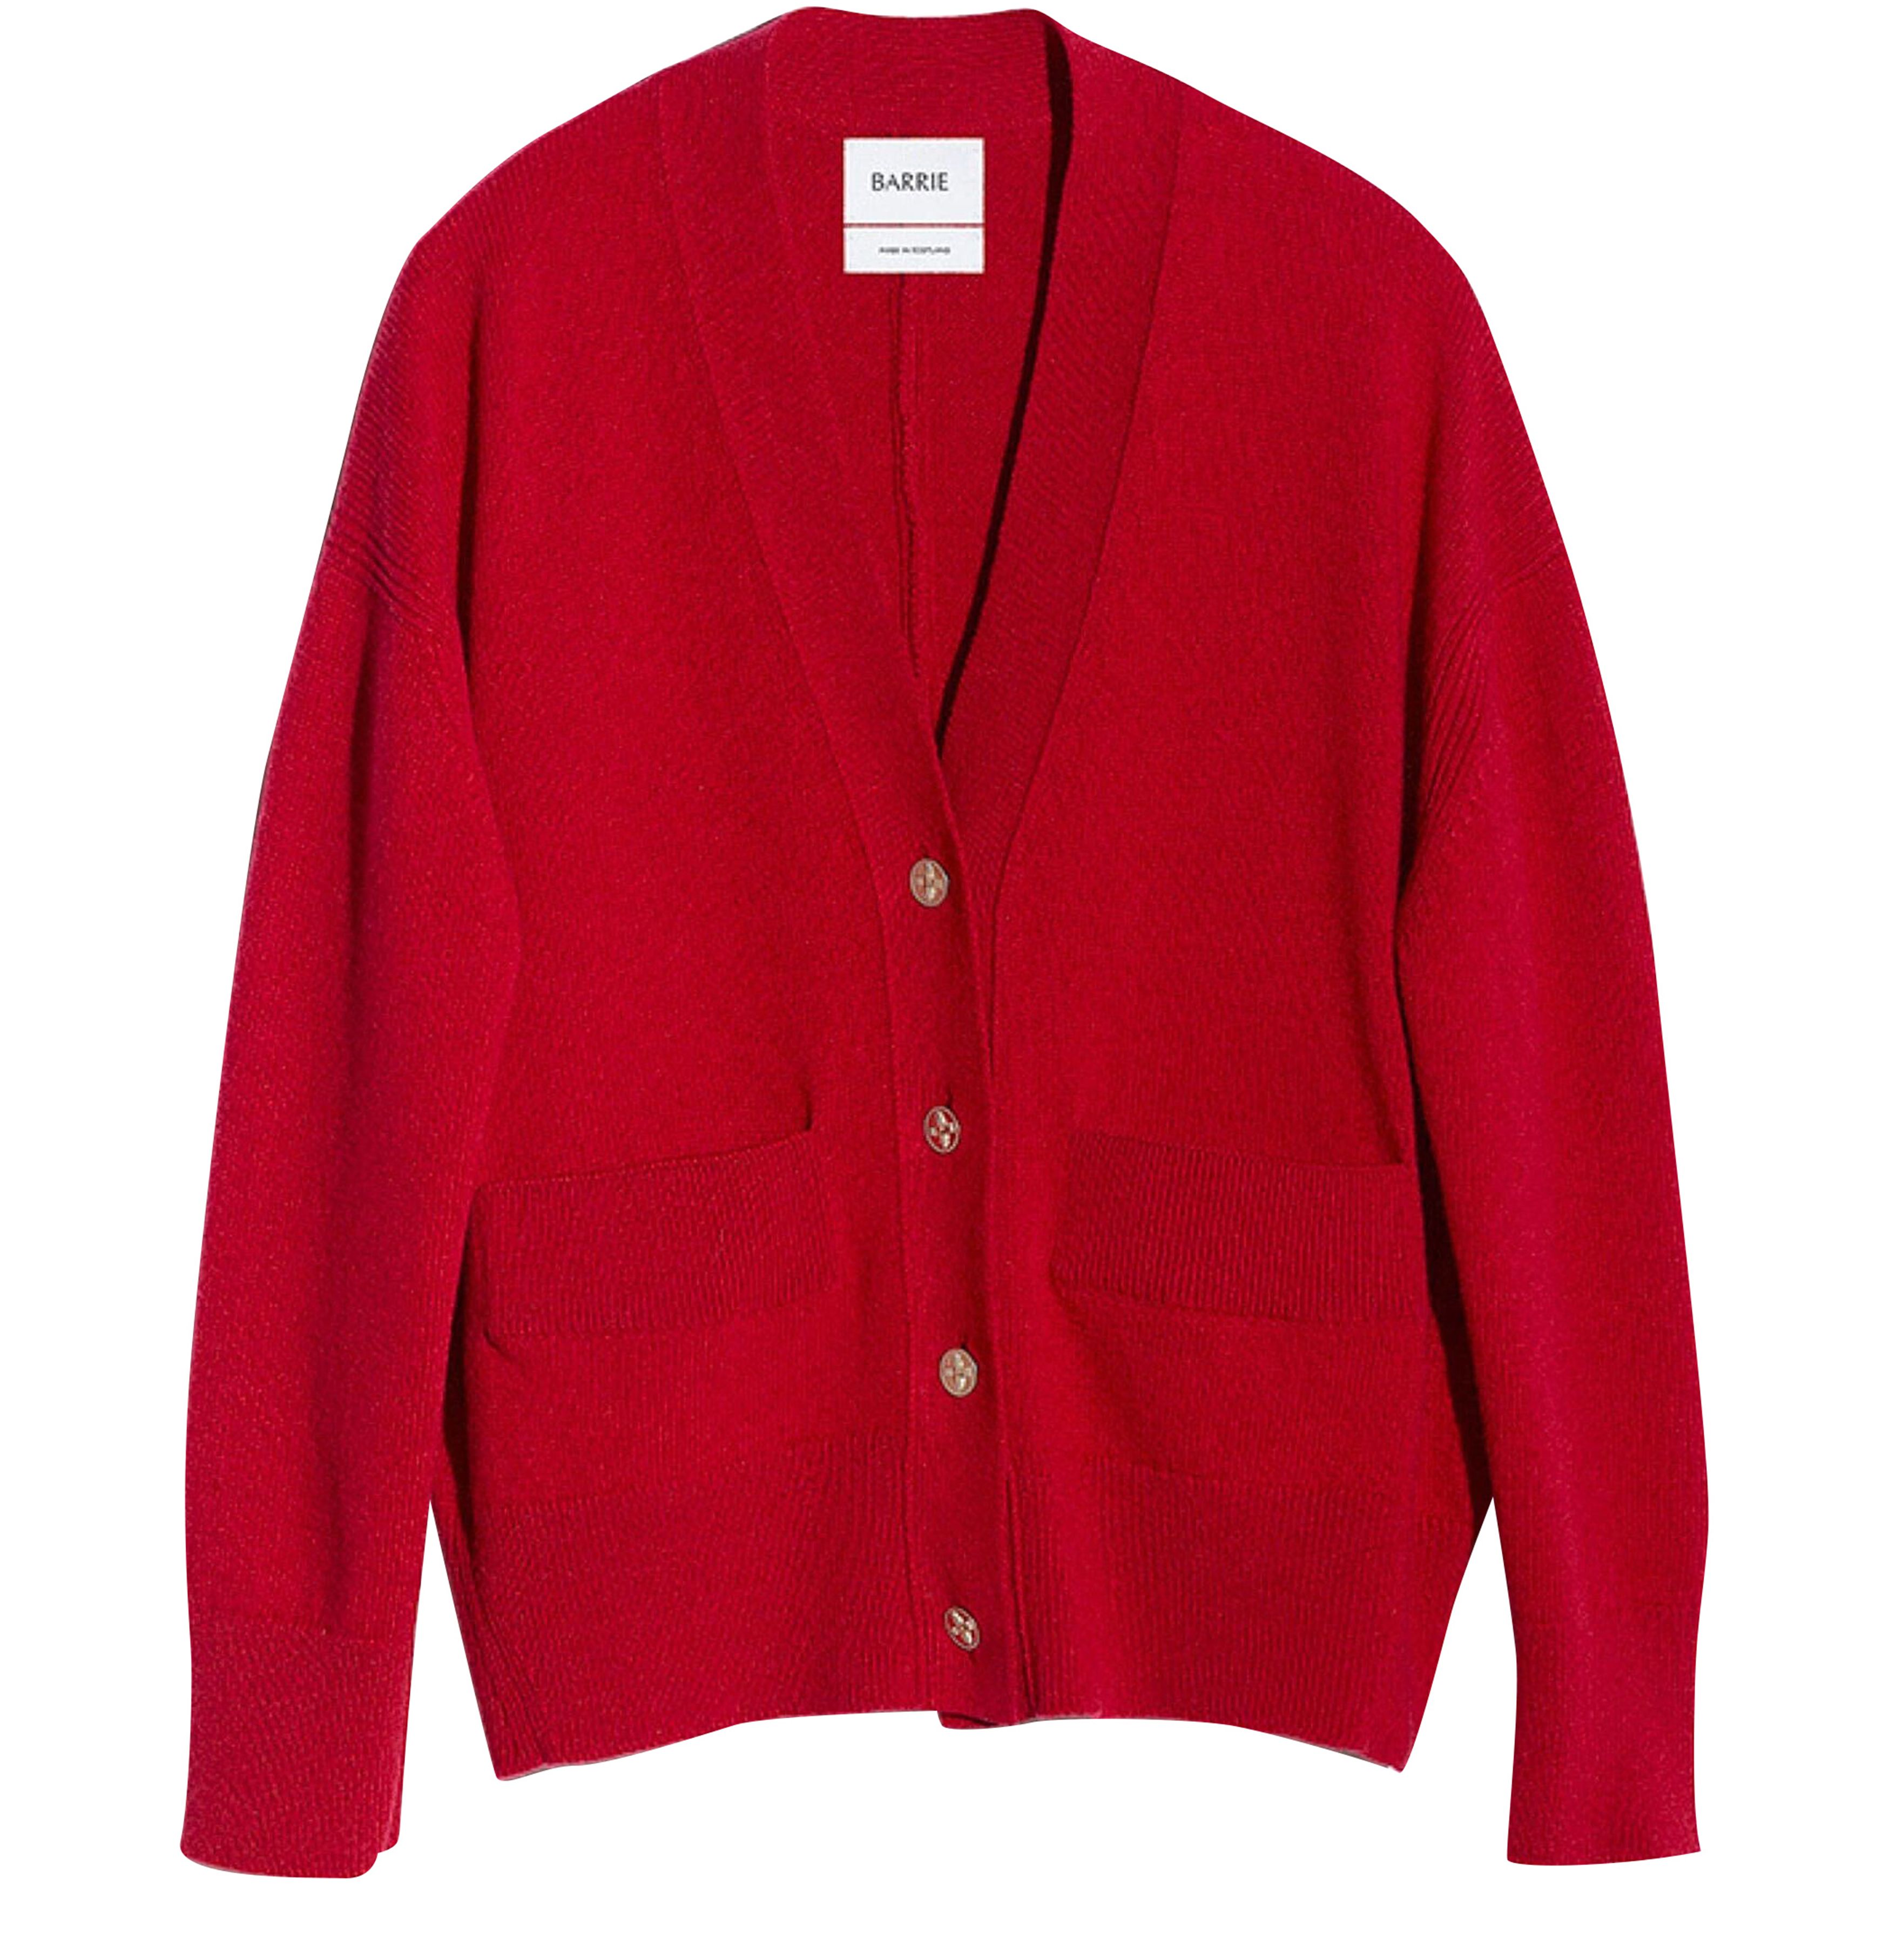 Barrie Iconic cashmere cardigan